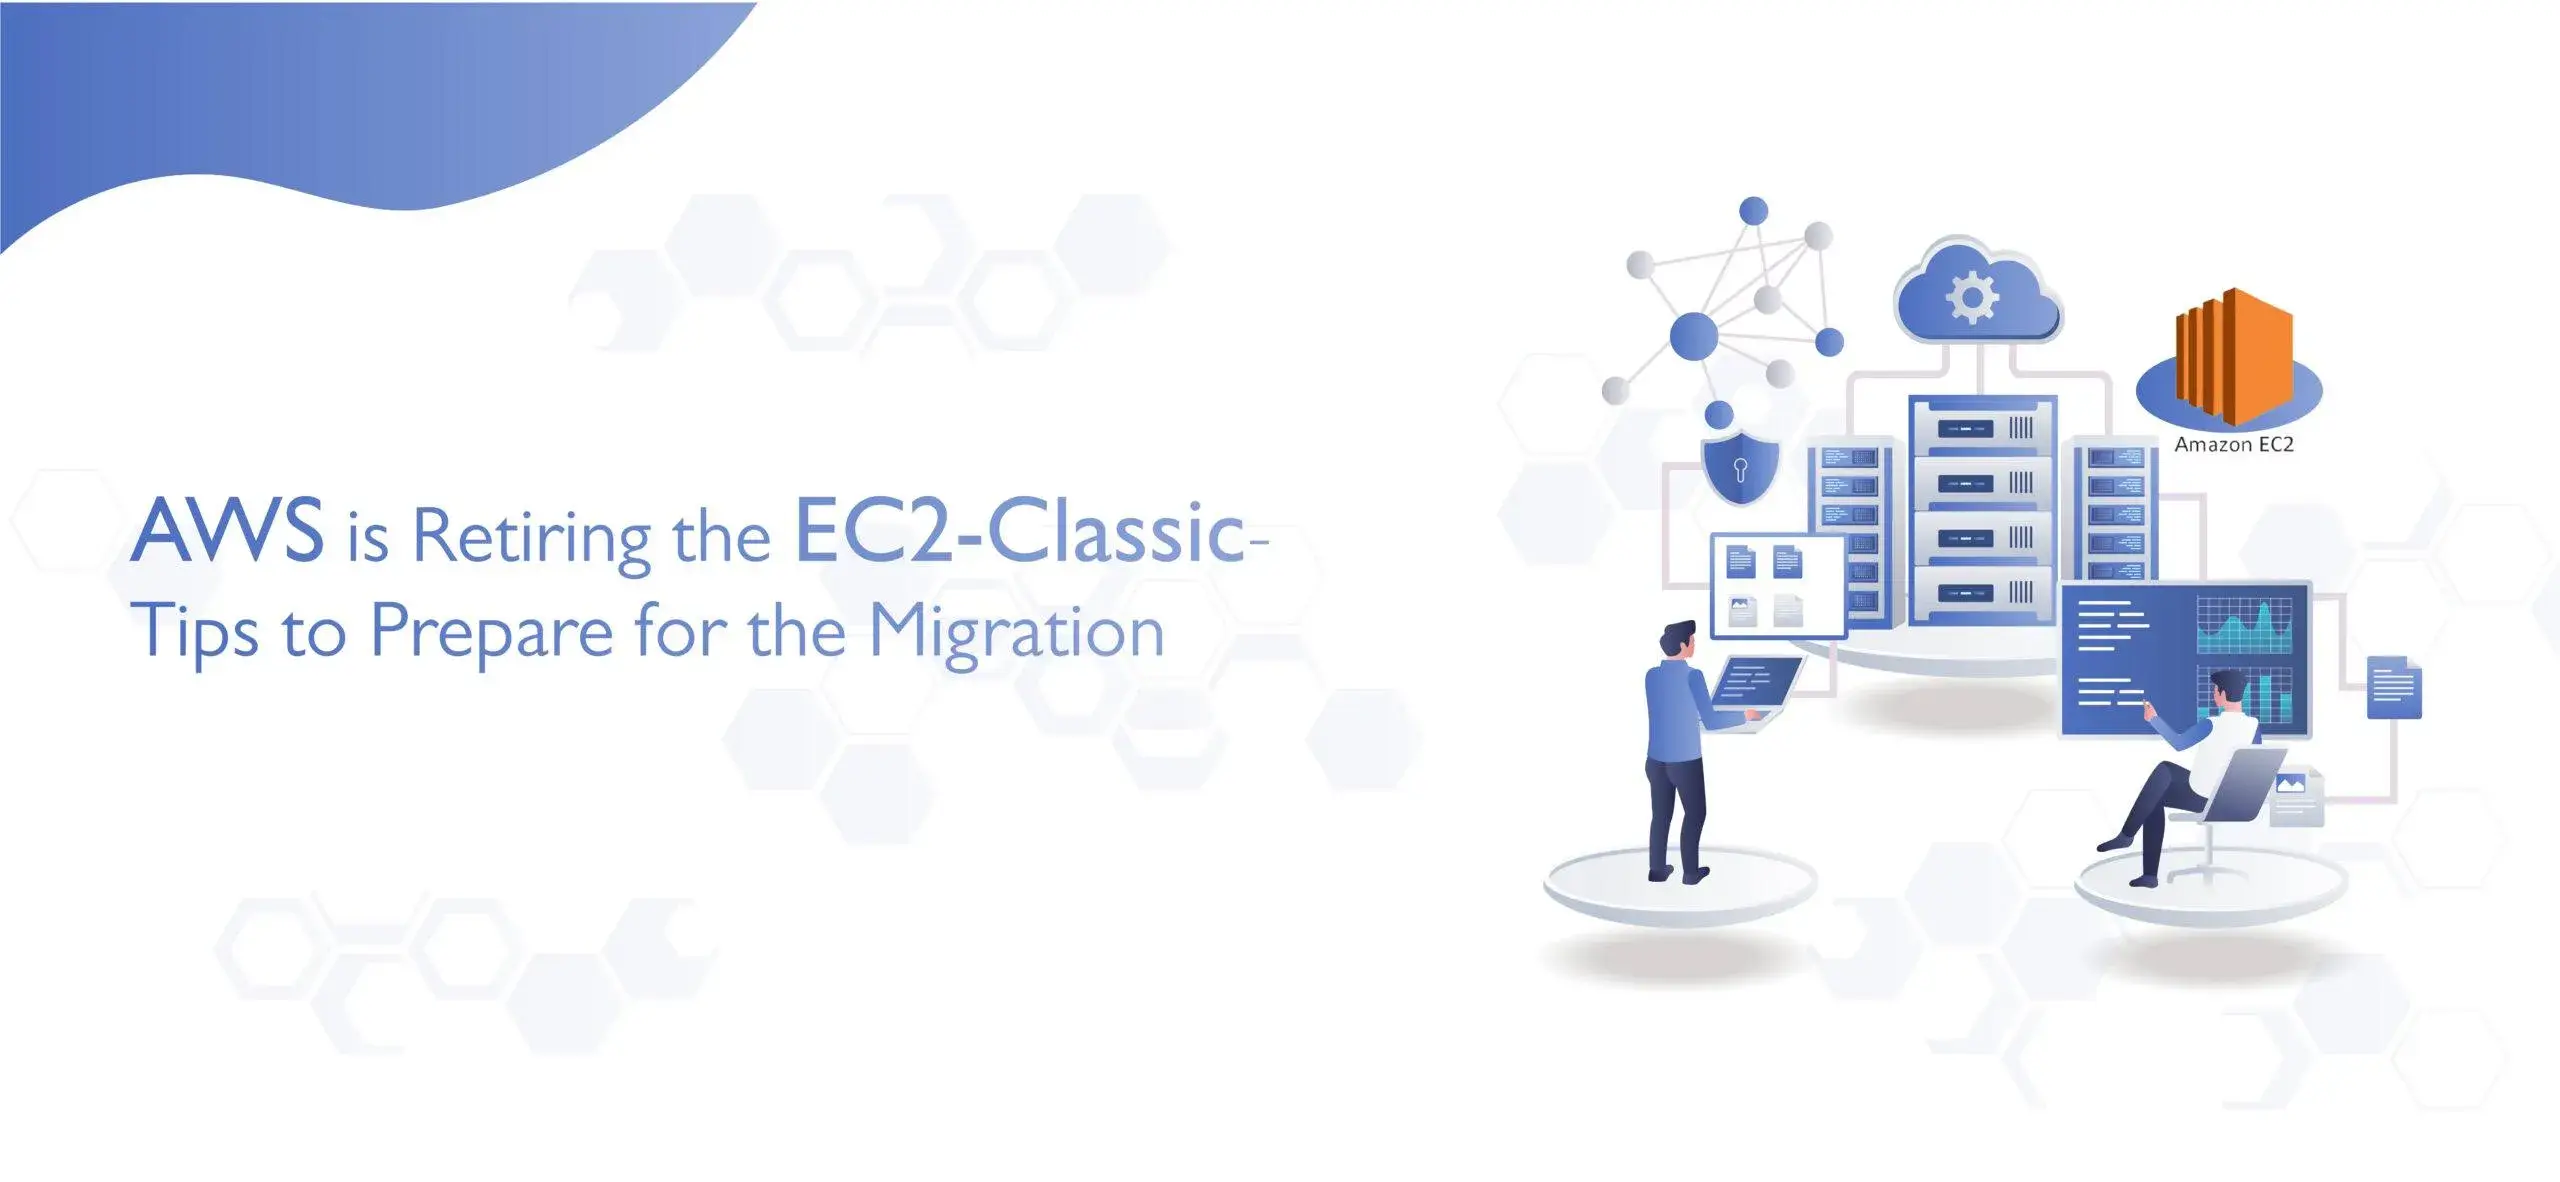 1712232193AWS is Retiring the EC2-Classic - Tips to Prepare for the Migration.webp